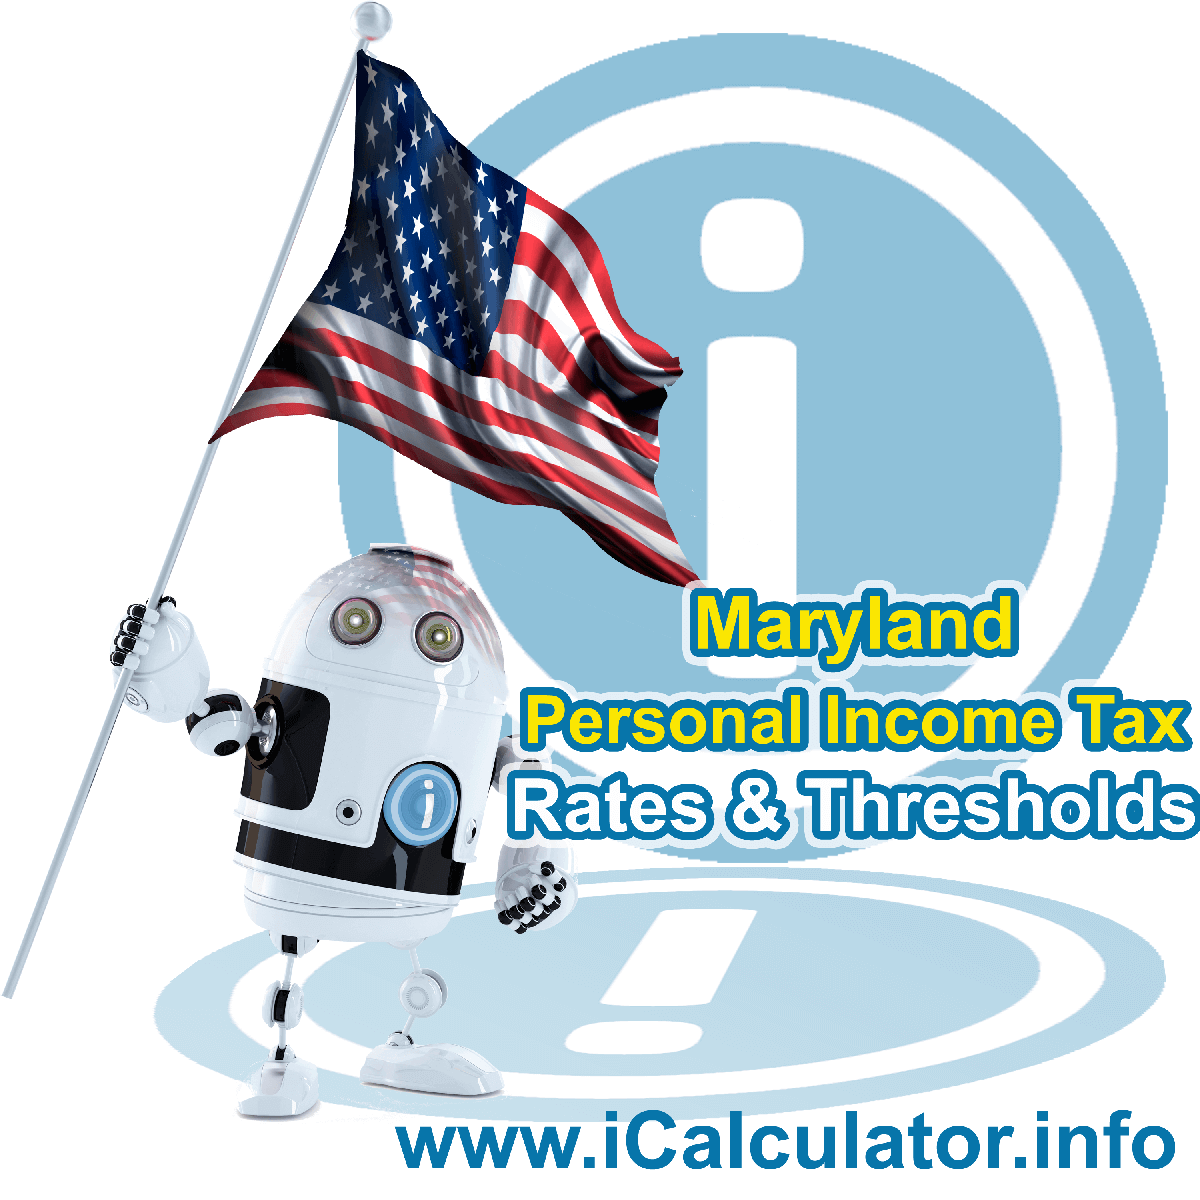 Maryland State Tax Tables 2023. This image displays details of the Maryland State Tax Tables for the 2023 tax return year which is provided in support of the 2023 US Tax Calculator